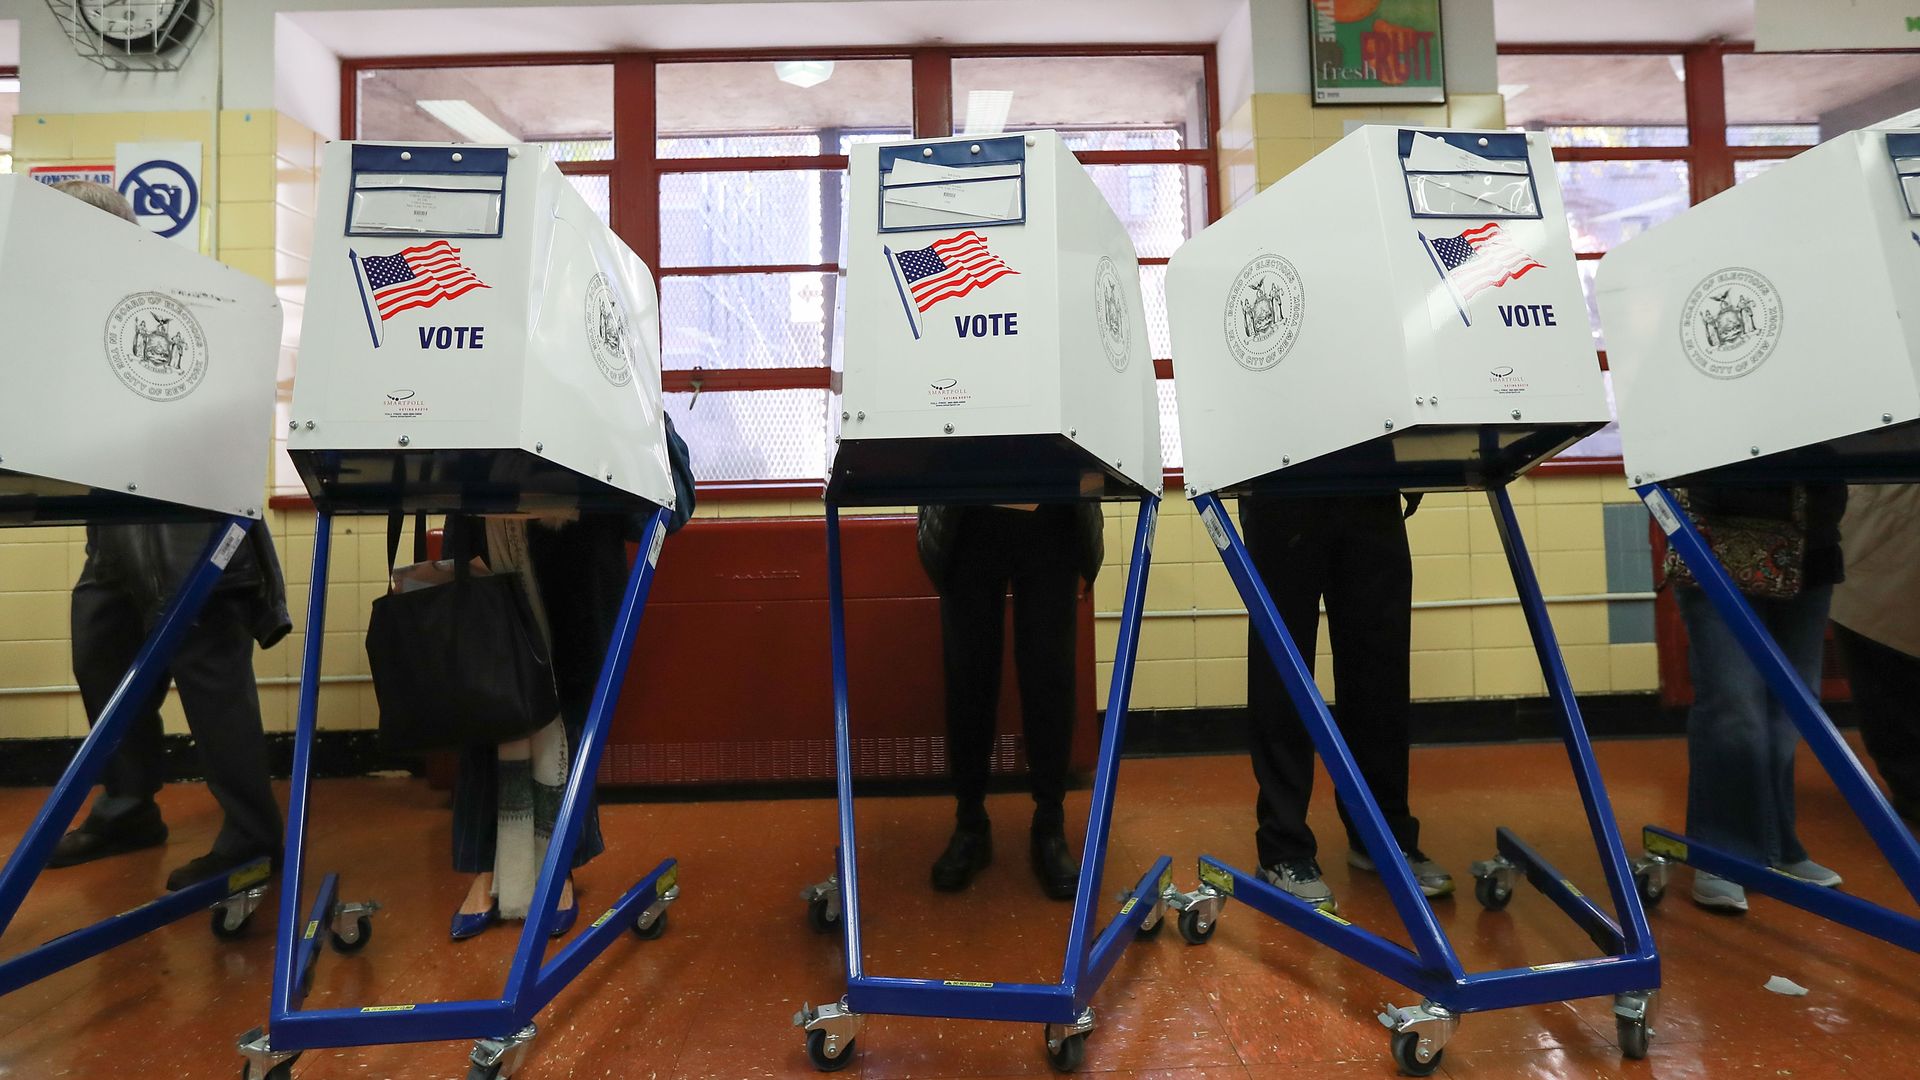 Voters cast their ballots. Photo: Michael Reaves/Getty Images